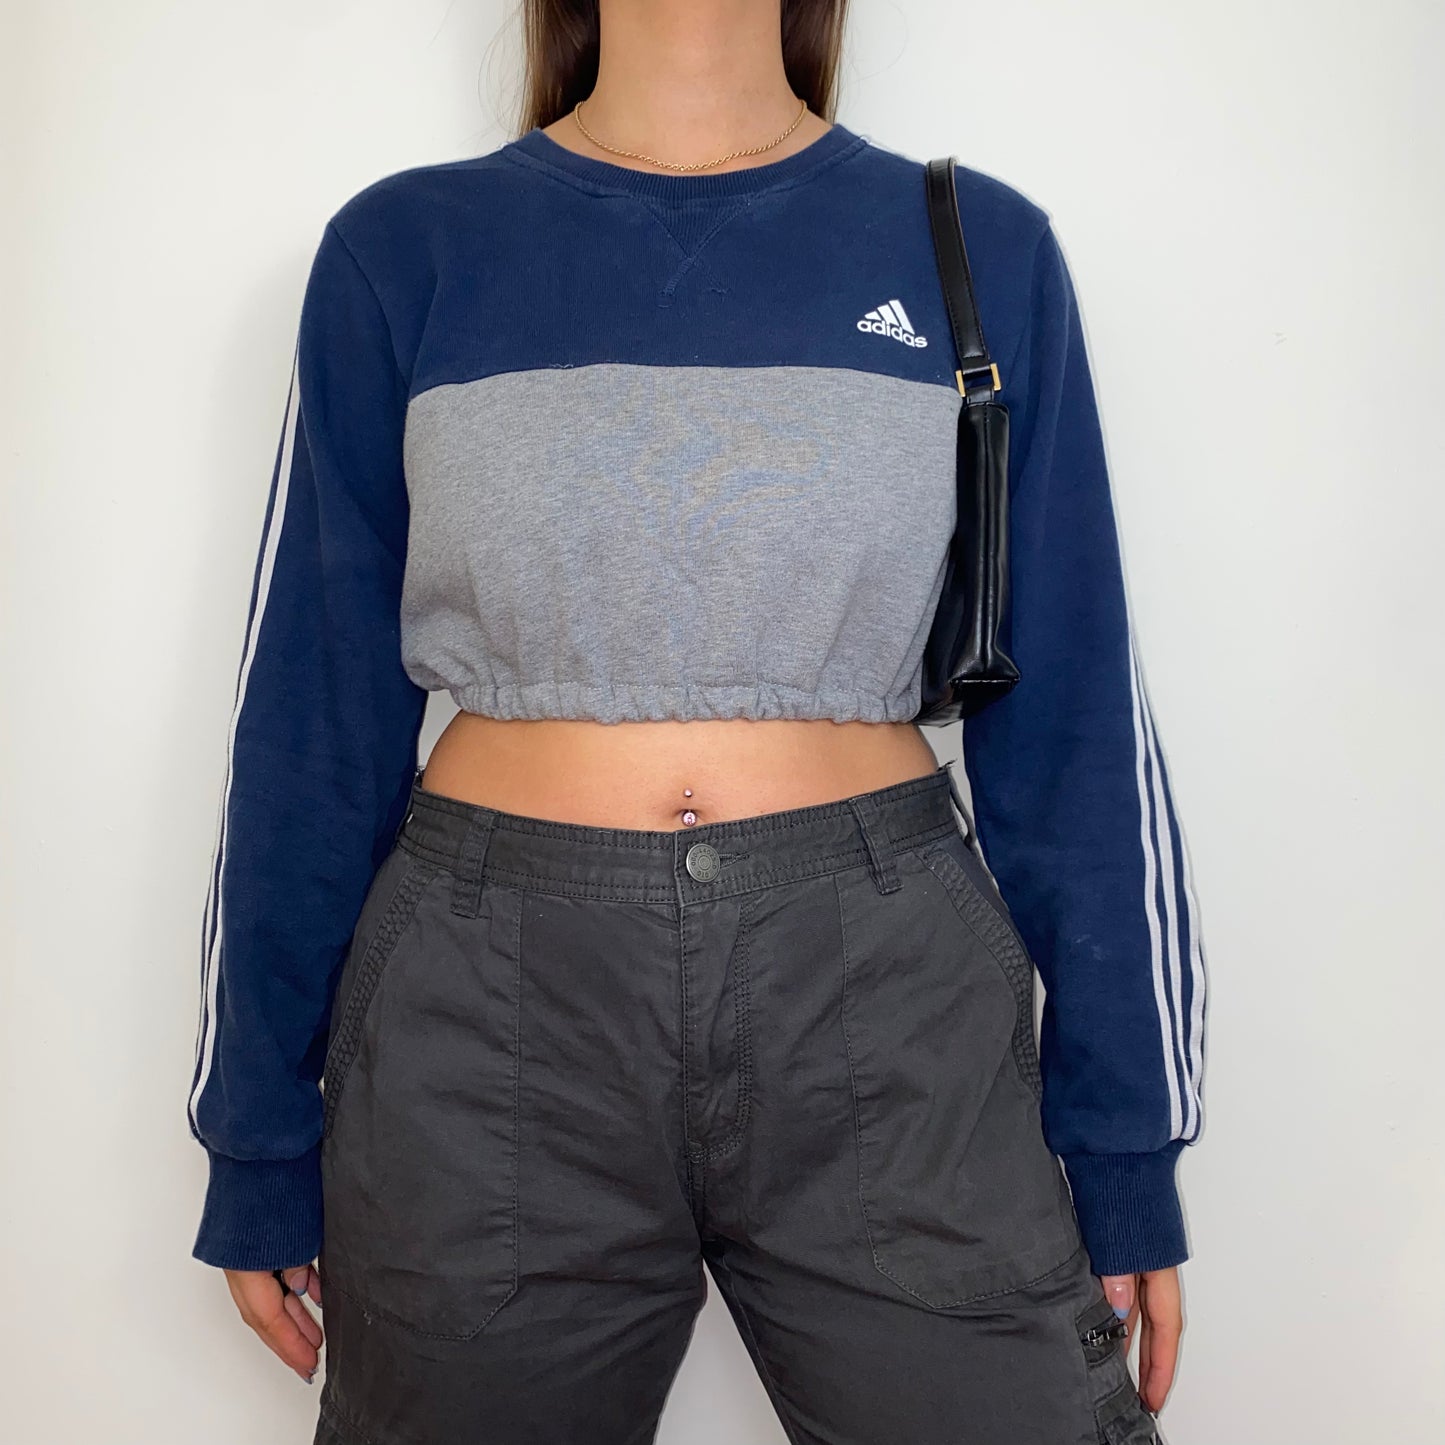 navy and grey cropped sweatshirt with white adidas logo shown on a model wearing grey cargo trousers and a black shoulder bag